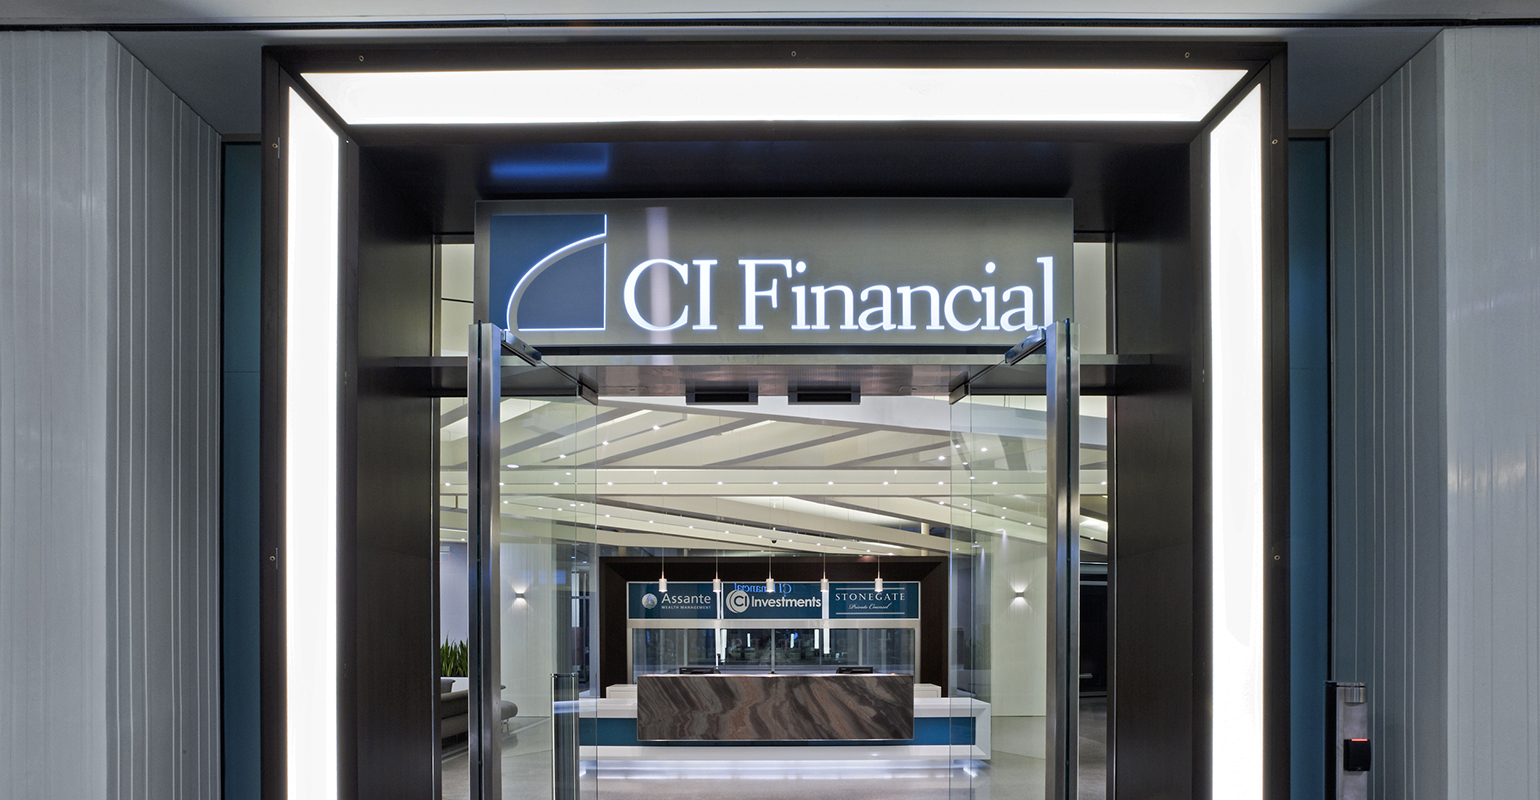 CI Financial Acquires Eaton Vance Assets from Morgan Stanley